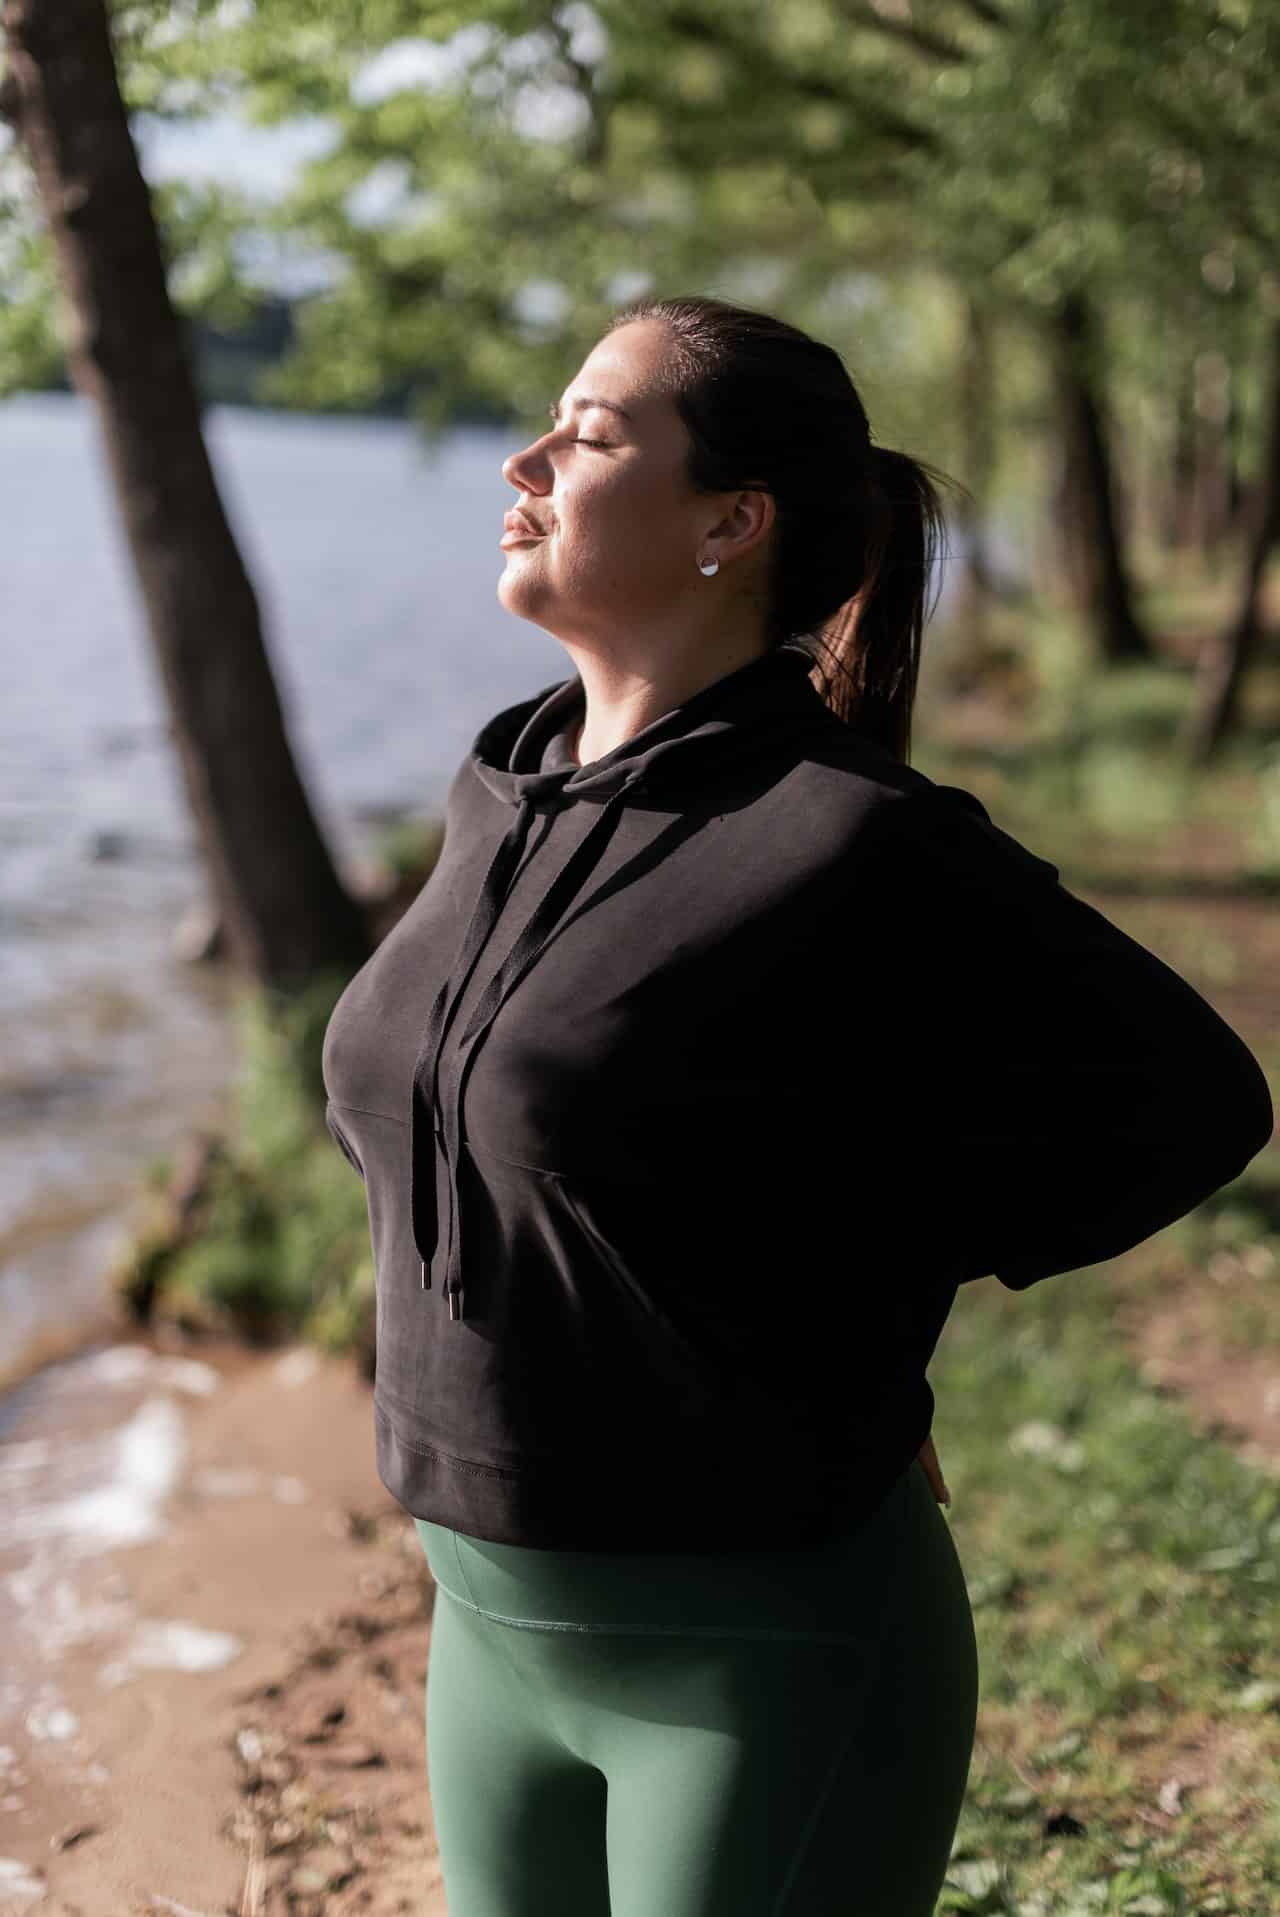 A woman in casual workout attire takes a deep breath, eyes closed. She is standing outdoors with a lake and trees visible in the background.